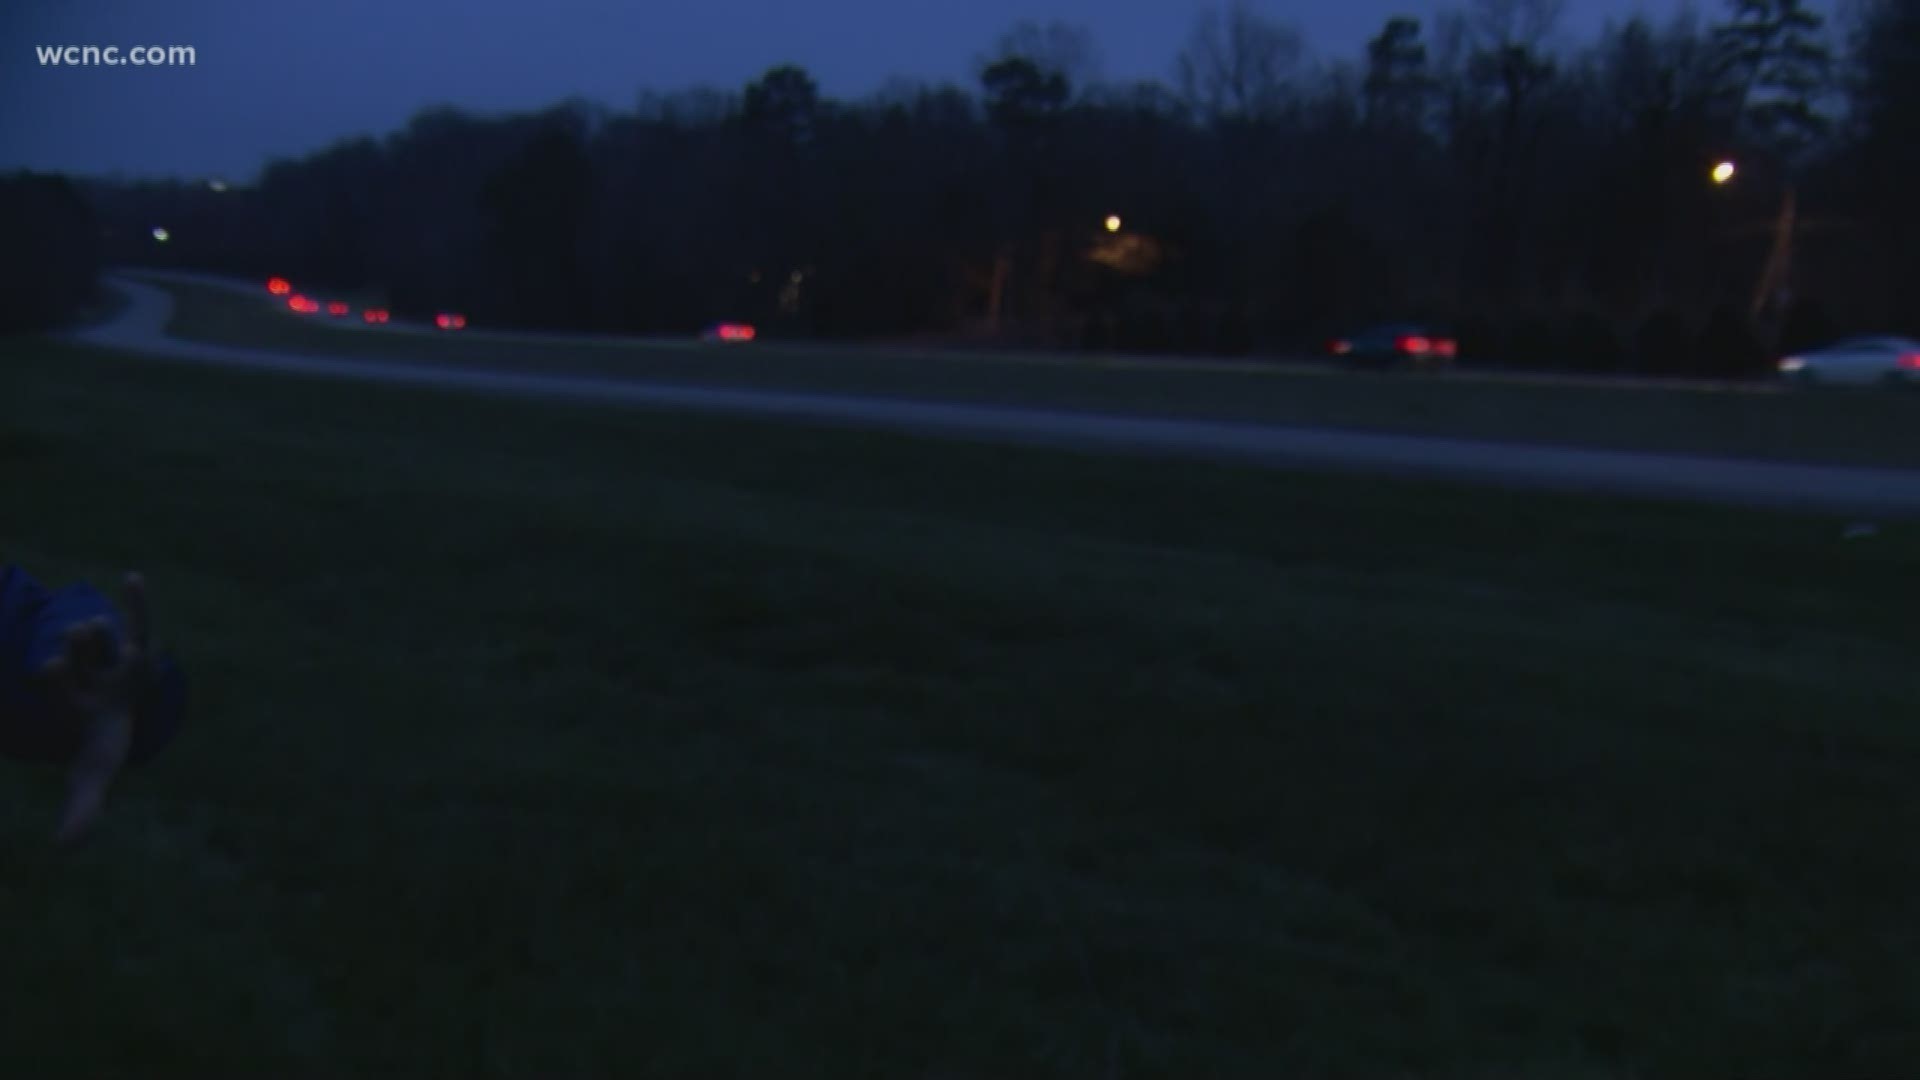 The oldest main road in Charlotte without streetlights could soon get hundreds of new lights.